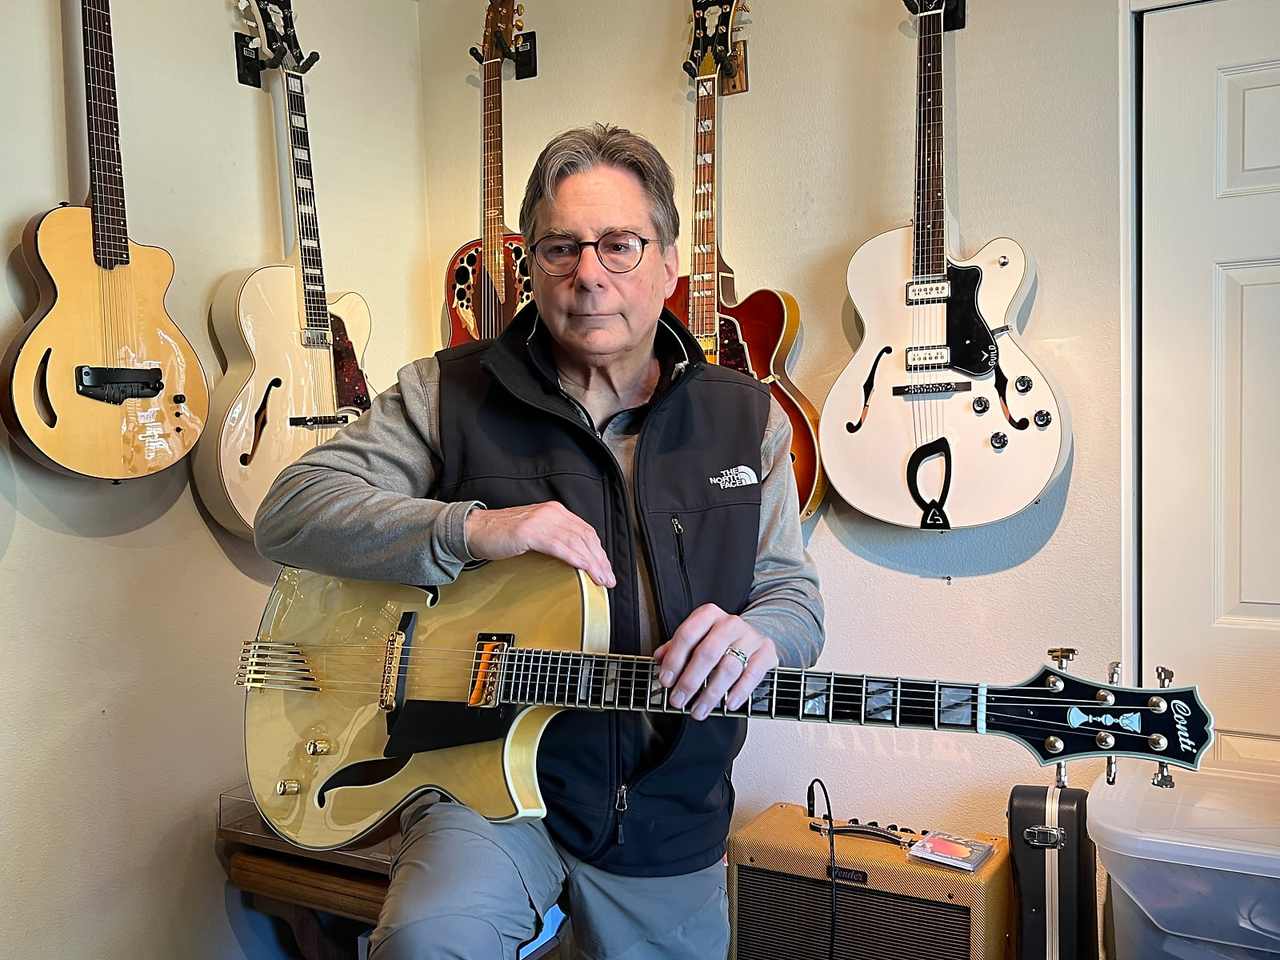 David Maricle with his new Natural Blonde Conti Entrada Archtop Jazz Guitar